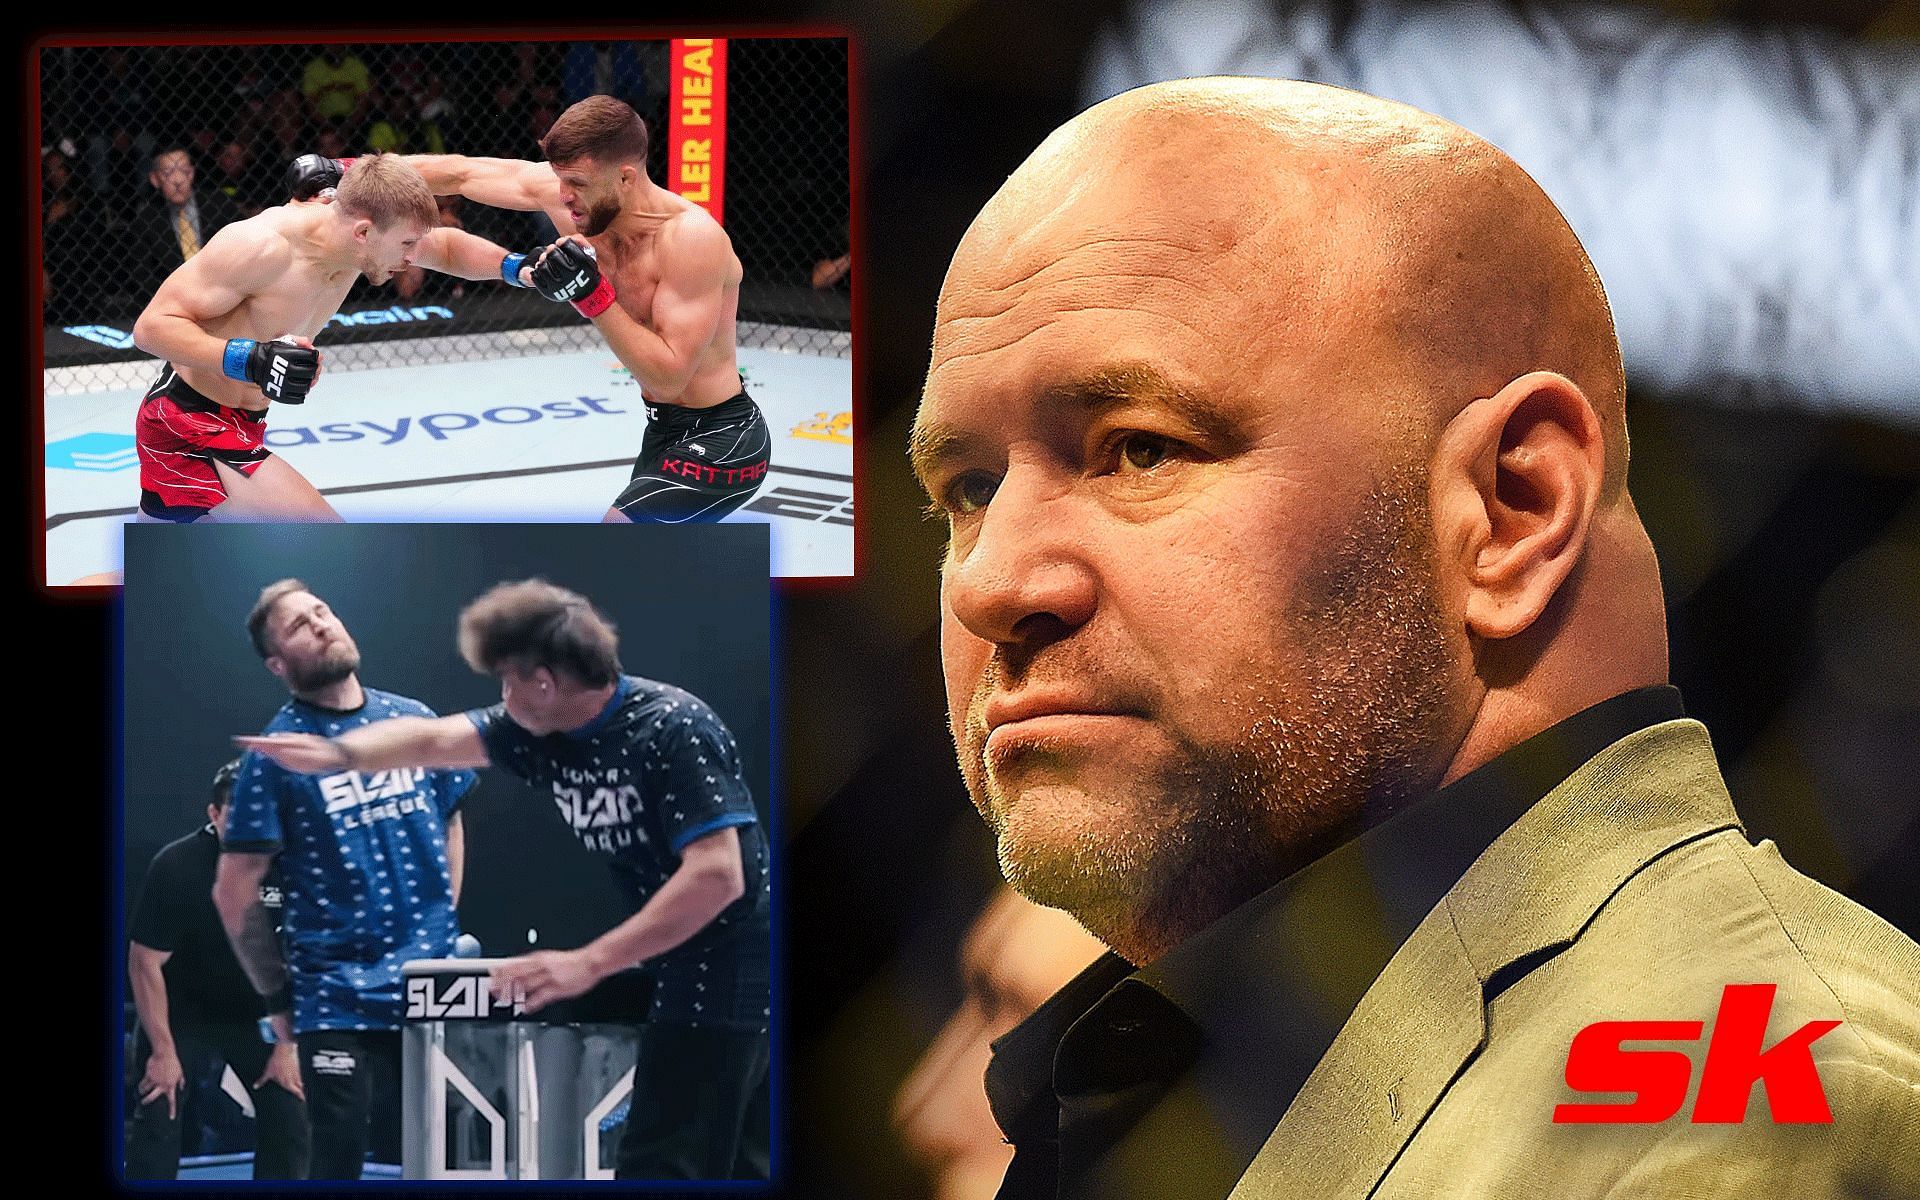 Power Slap Fighting League (left) and Dana White (right) [Image Courtesy: Getty Images, @ufc and @powerslap on Instagram]